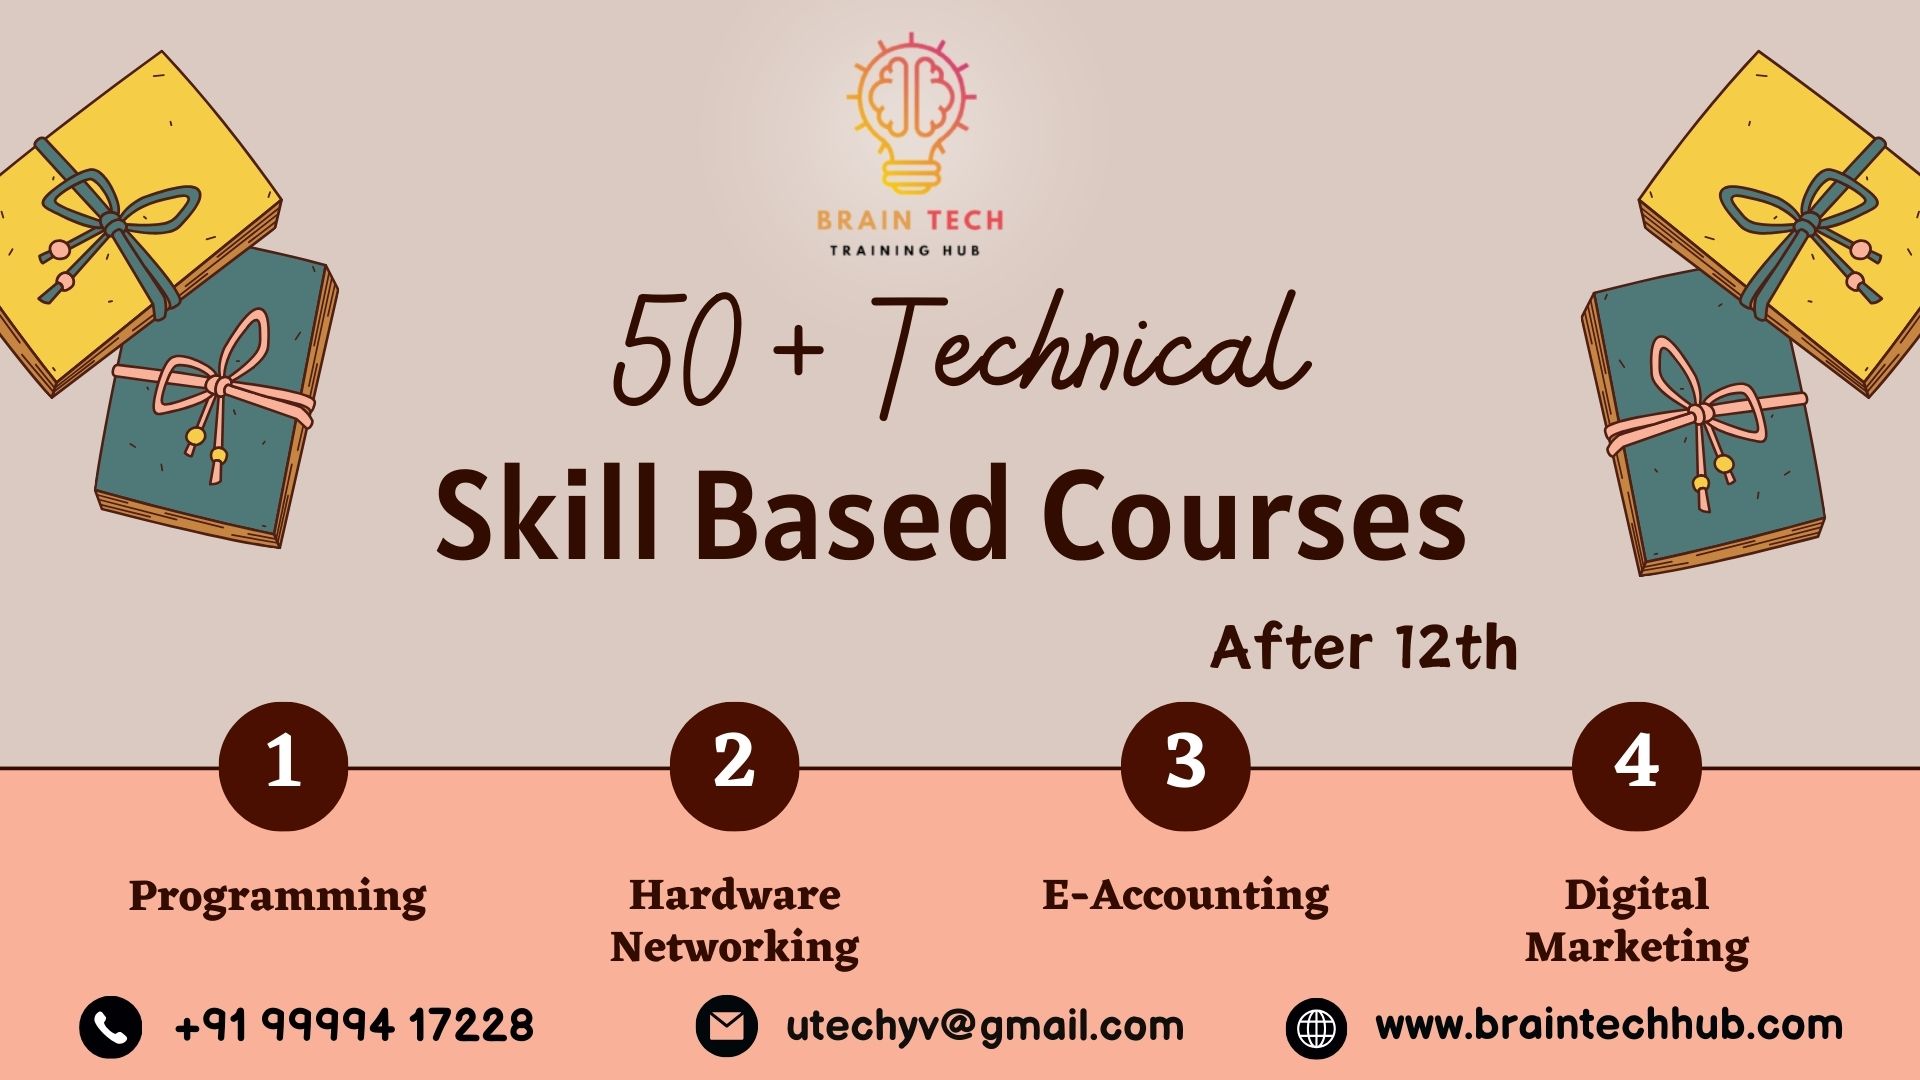 50+ Technical Skill based courses after 12th